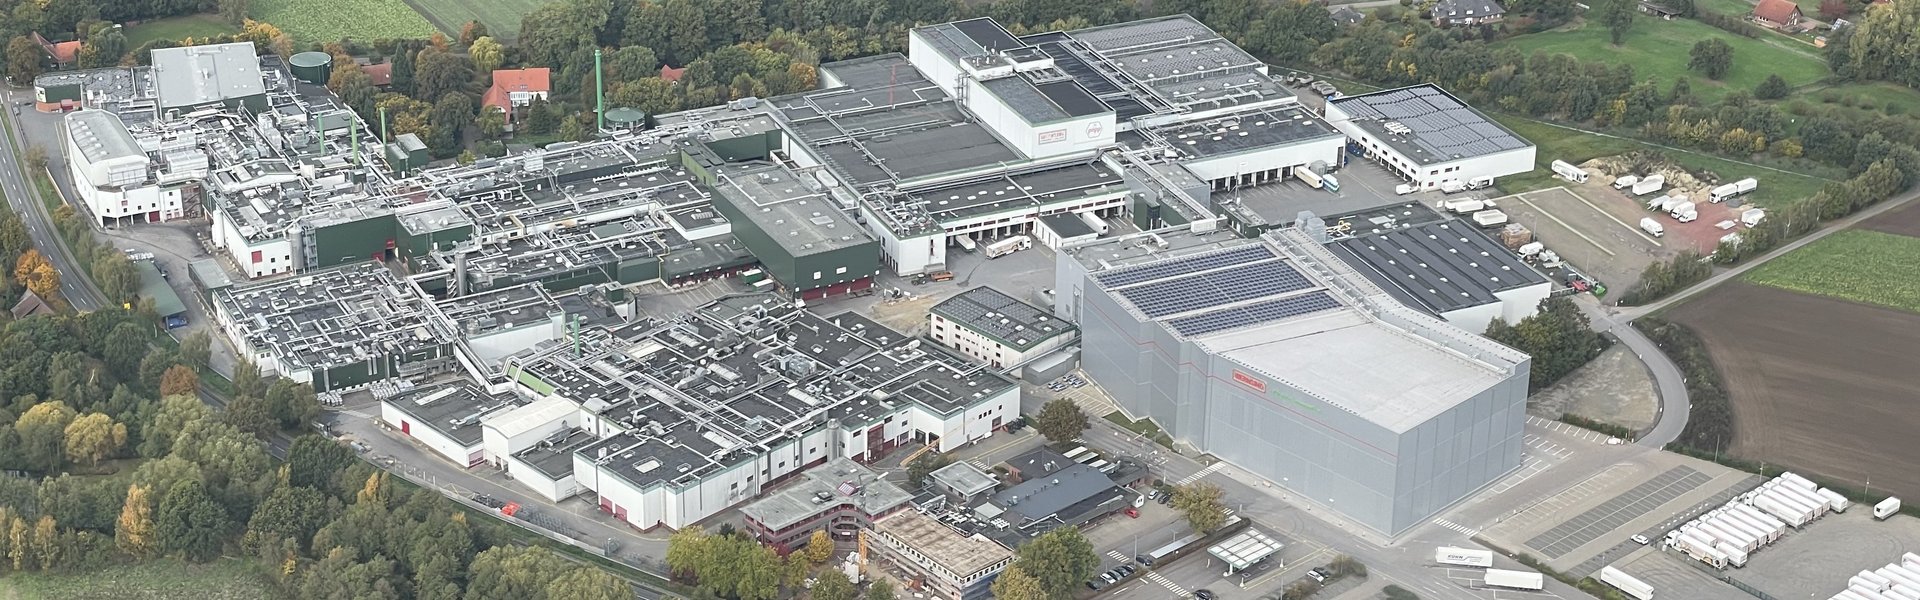 Aerial view of new automated storage system for Wernsing Feinkost GmbH